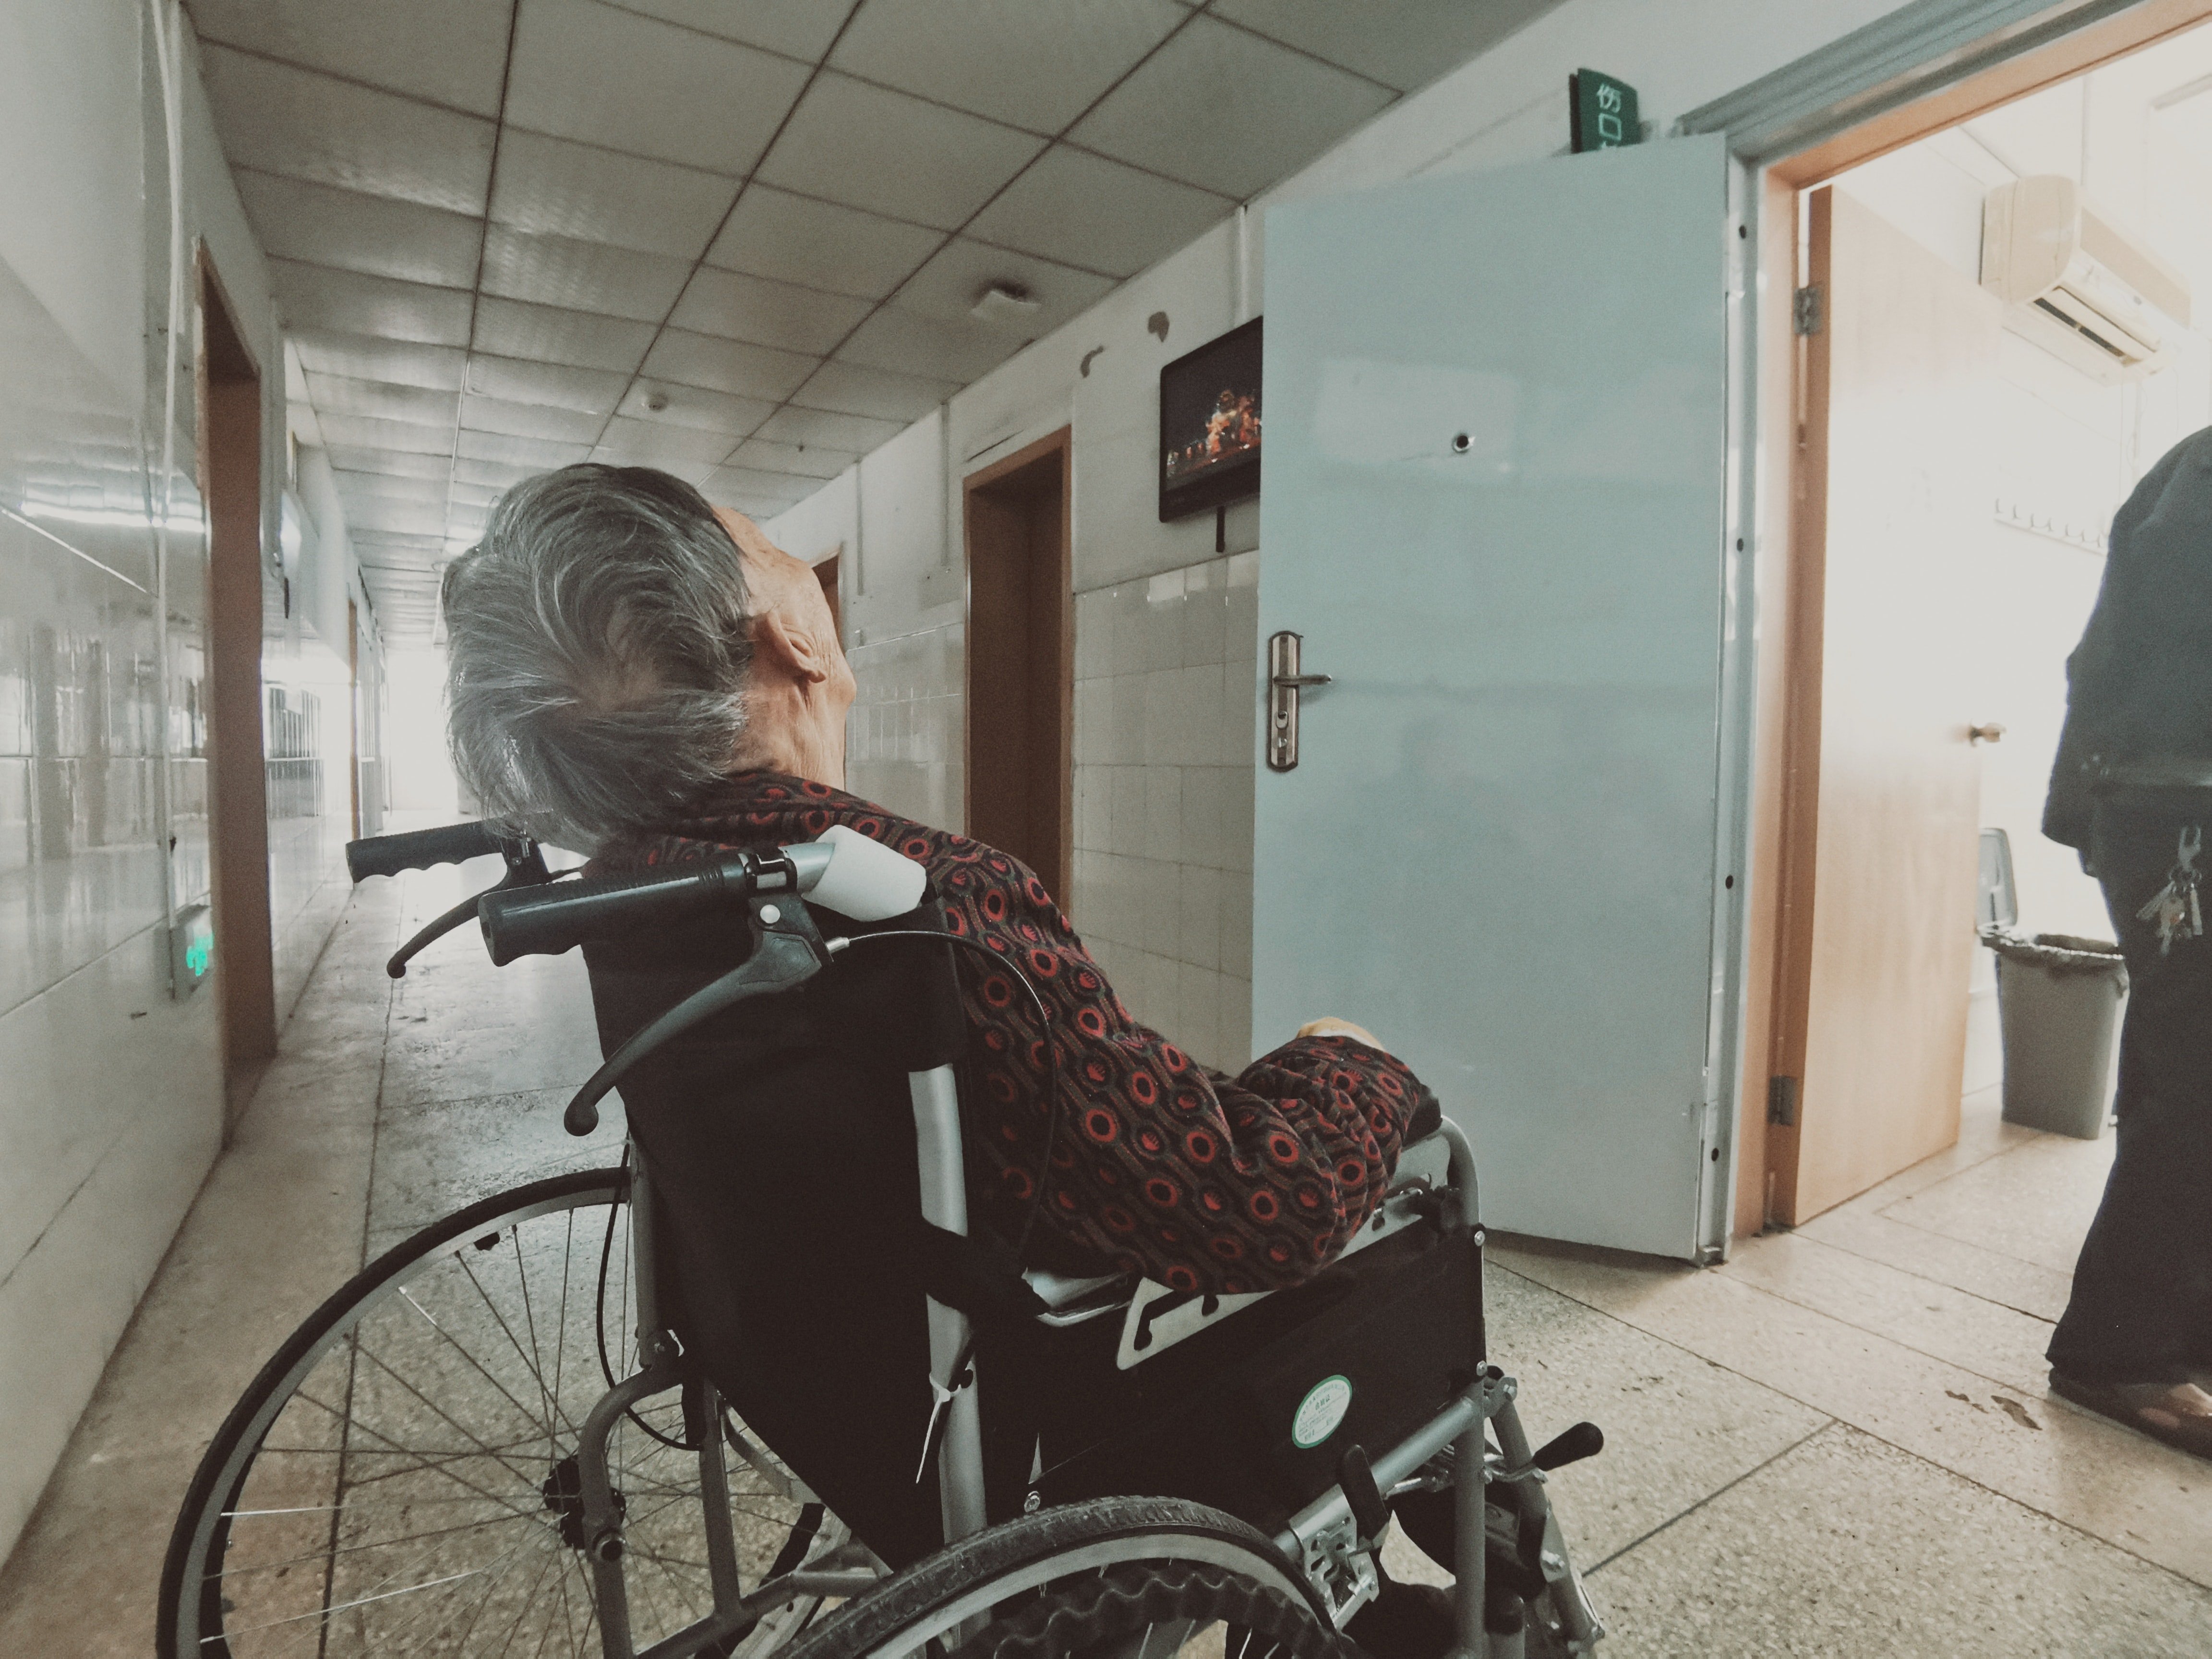 The old woman revealed she was kicked out of the hospital. | Source: Unsplash